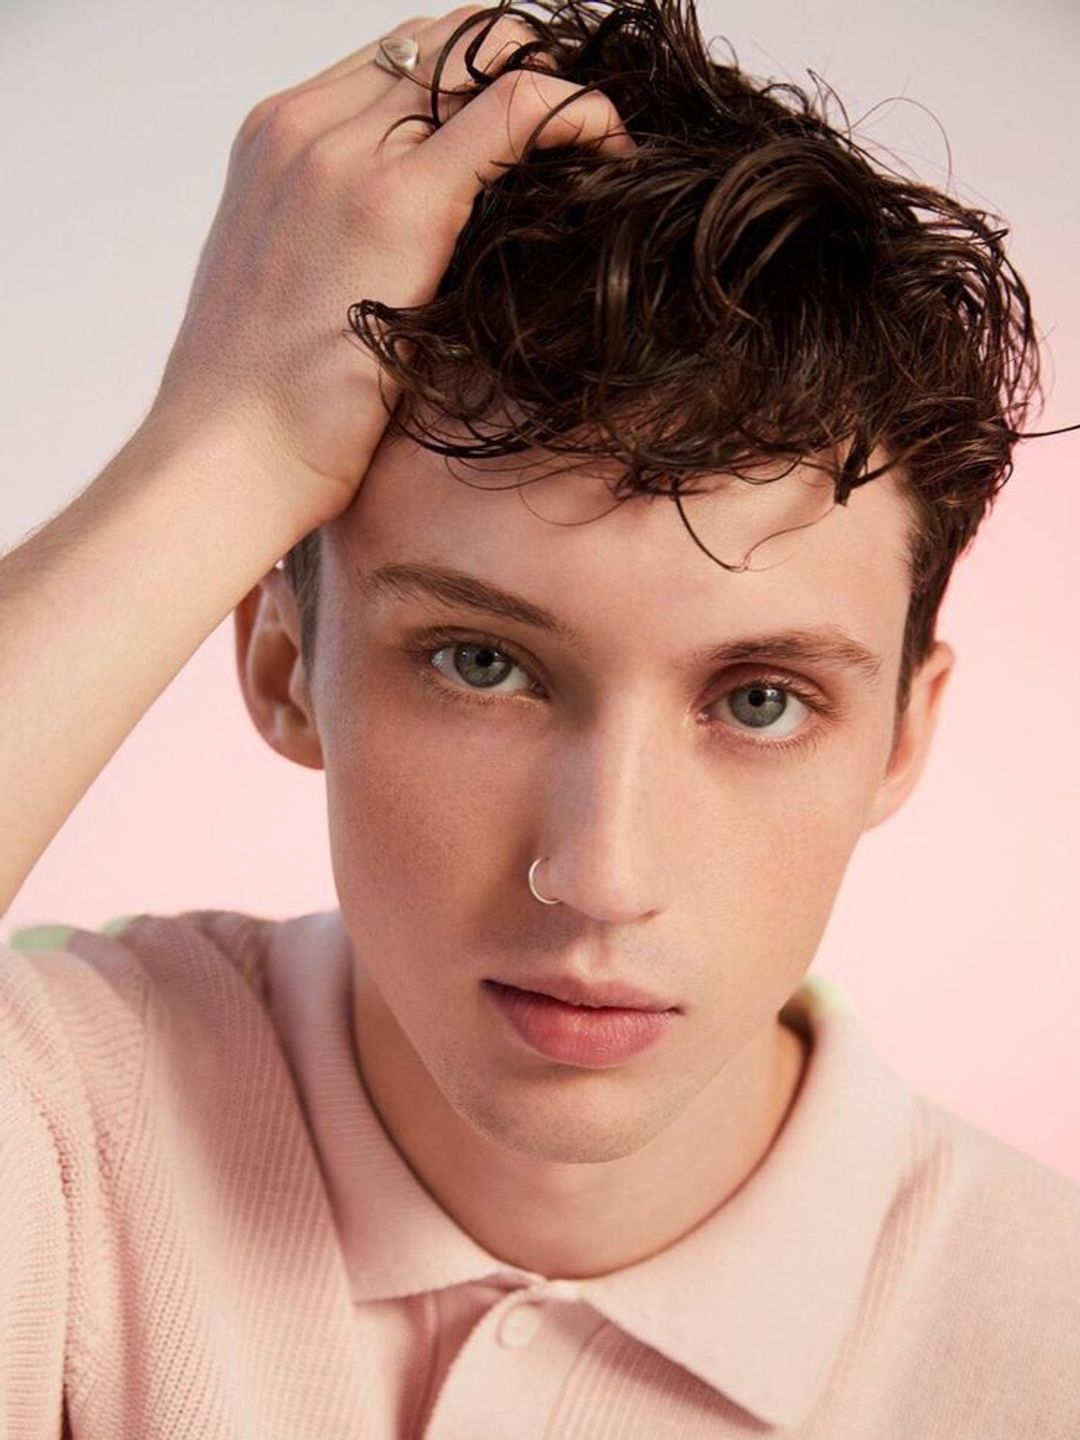 Troye Sivan where does he live